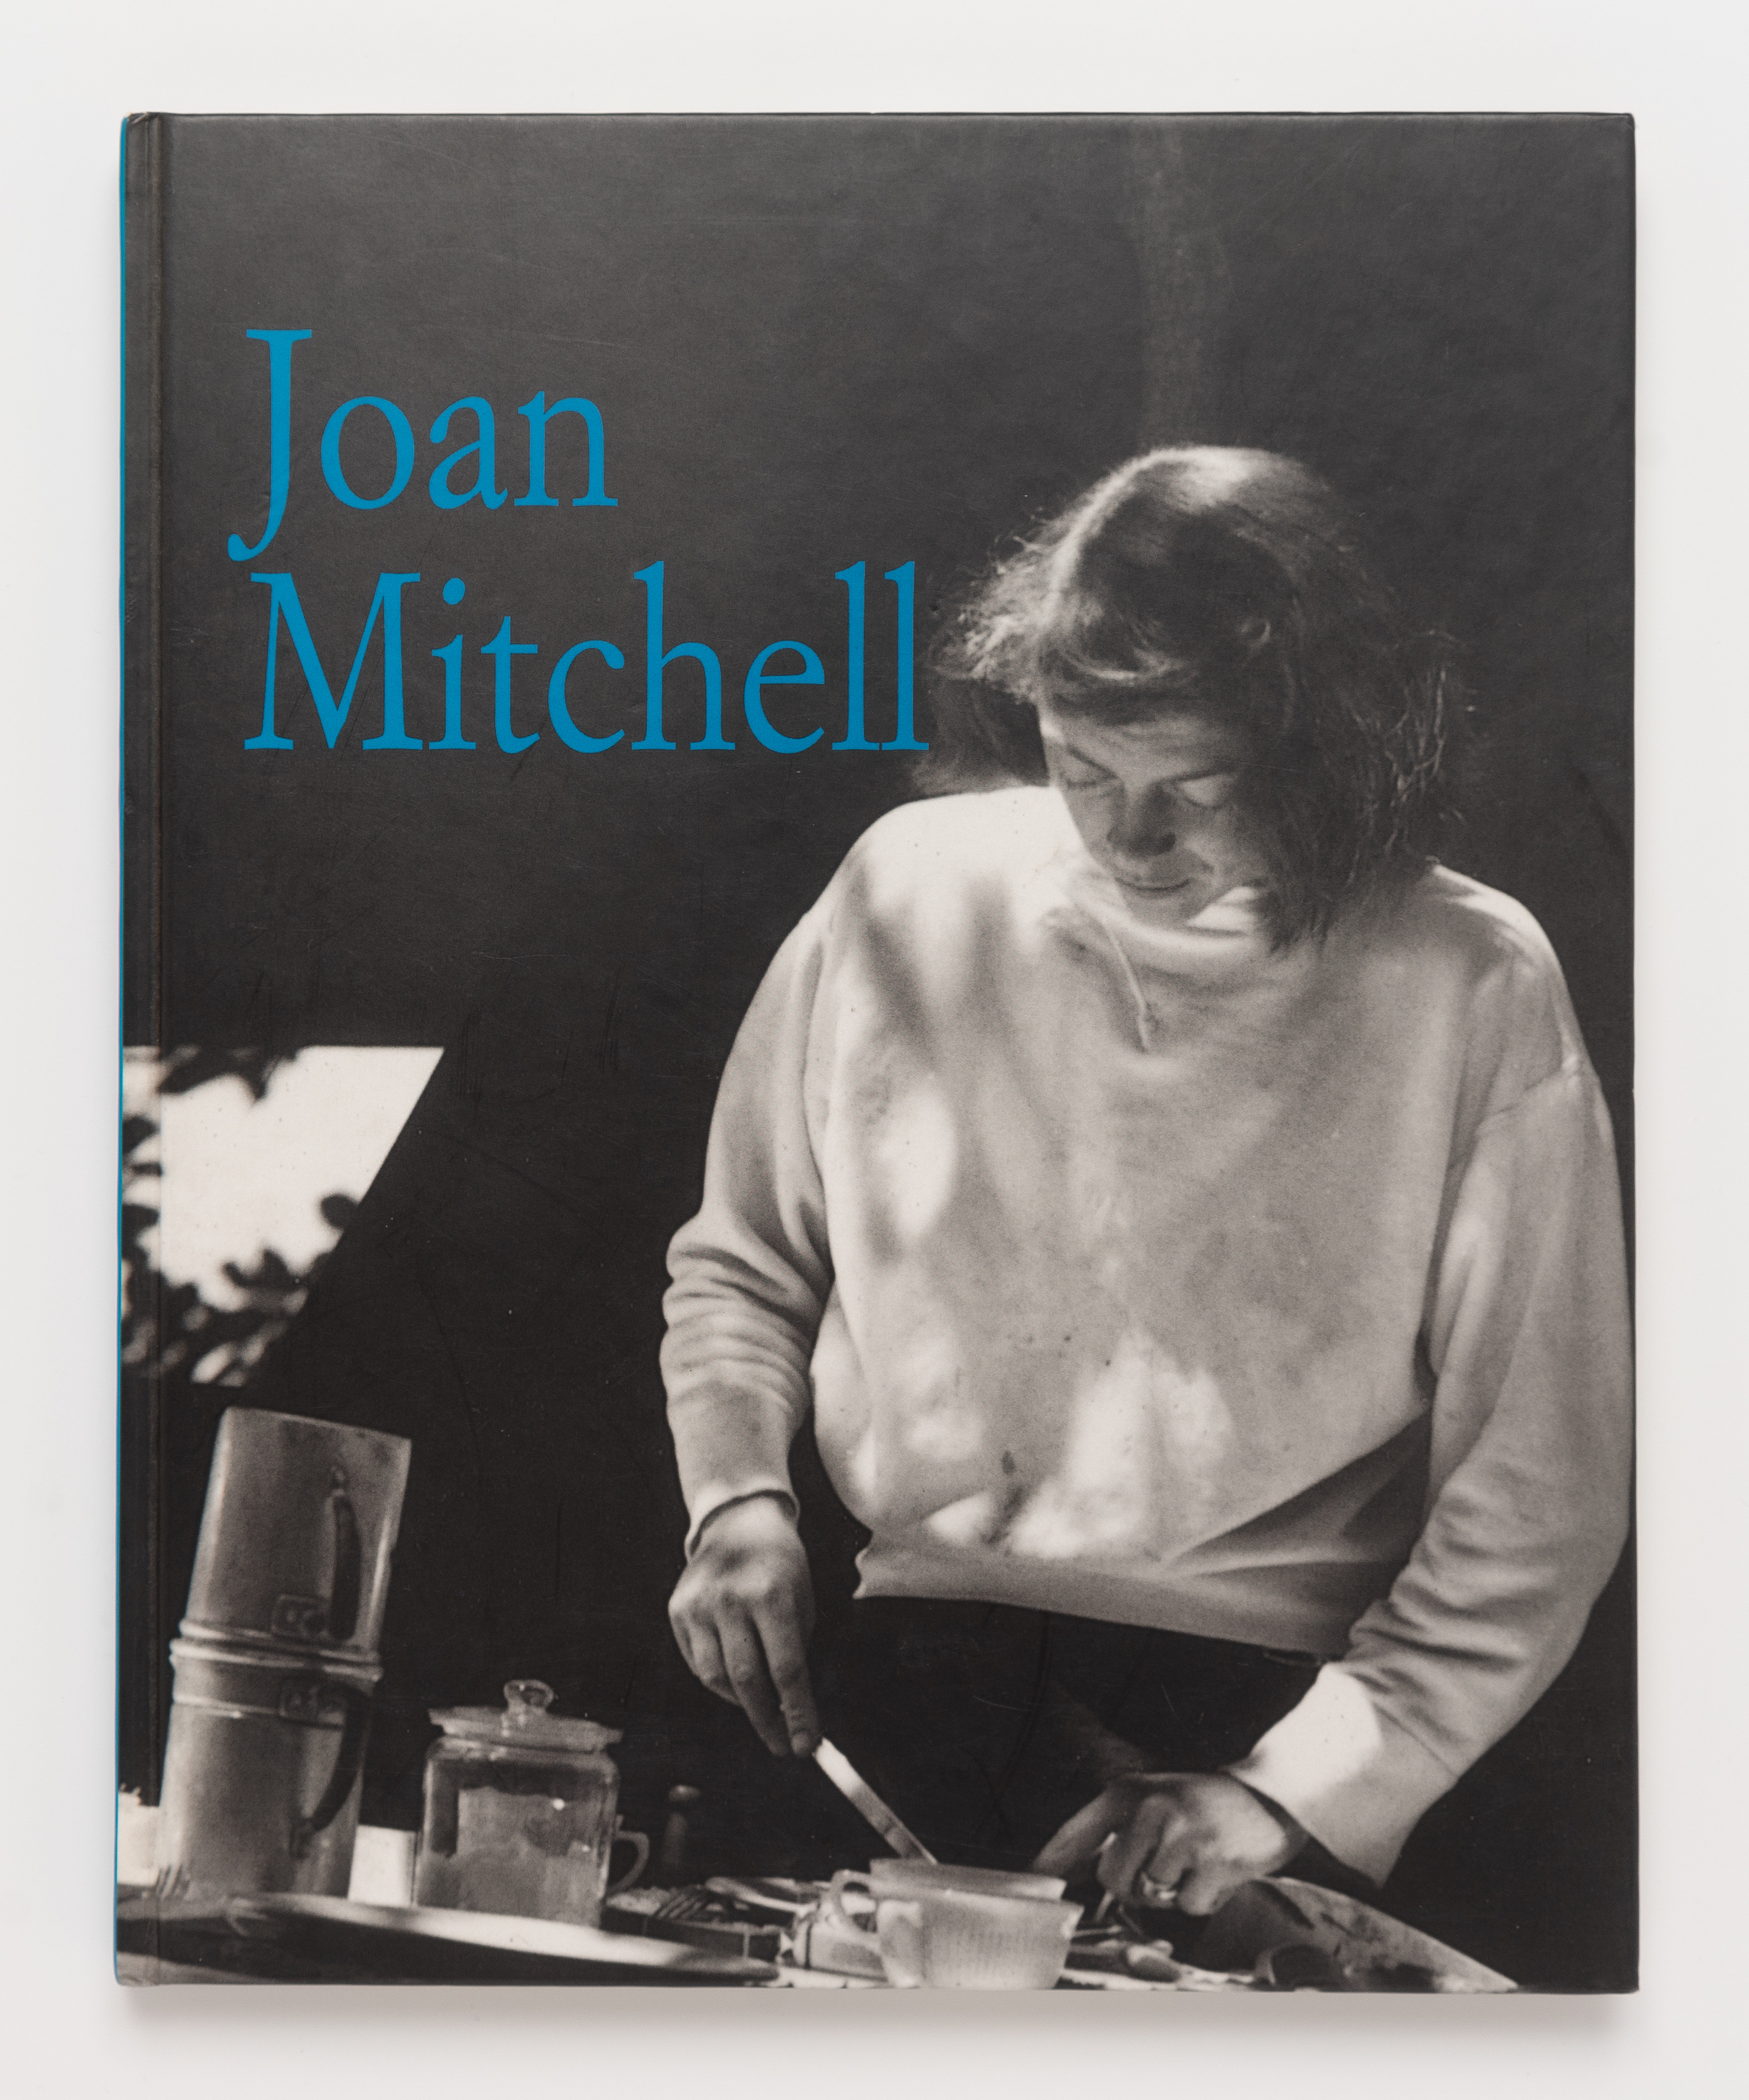 Joan Mitchell: Paintings 1950 to 1955: From the Estate of Joan Mitchell - Hal Fondren